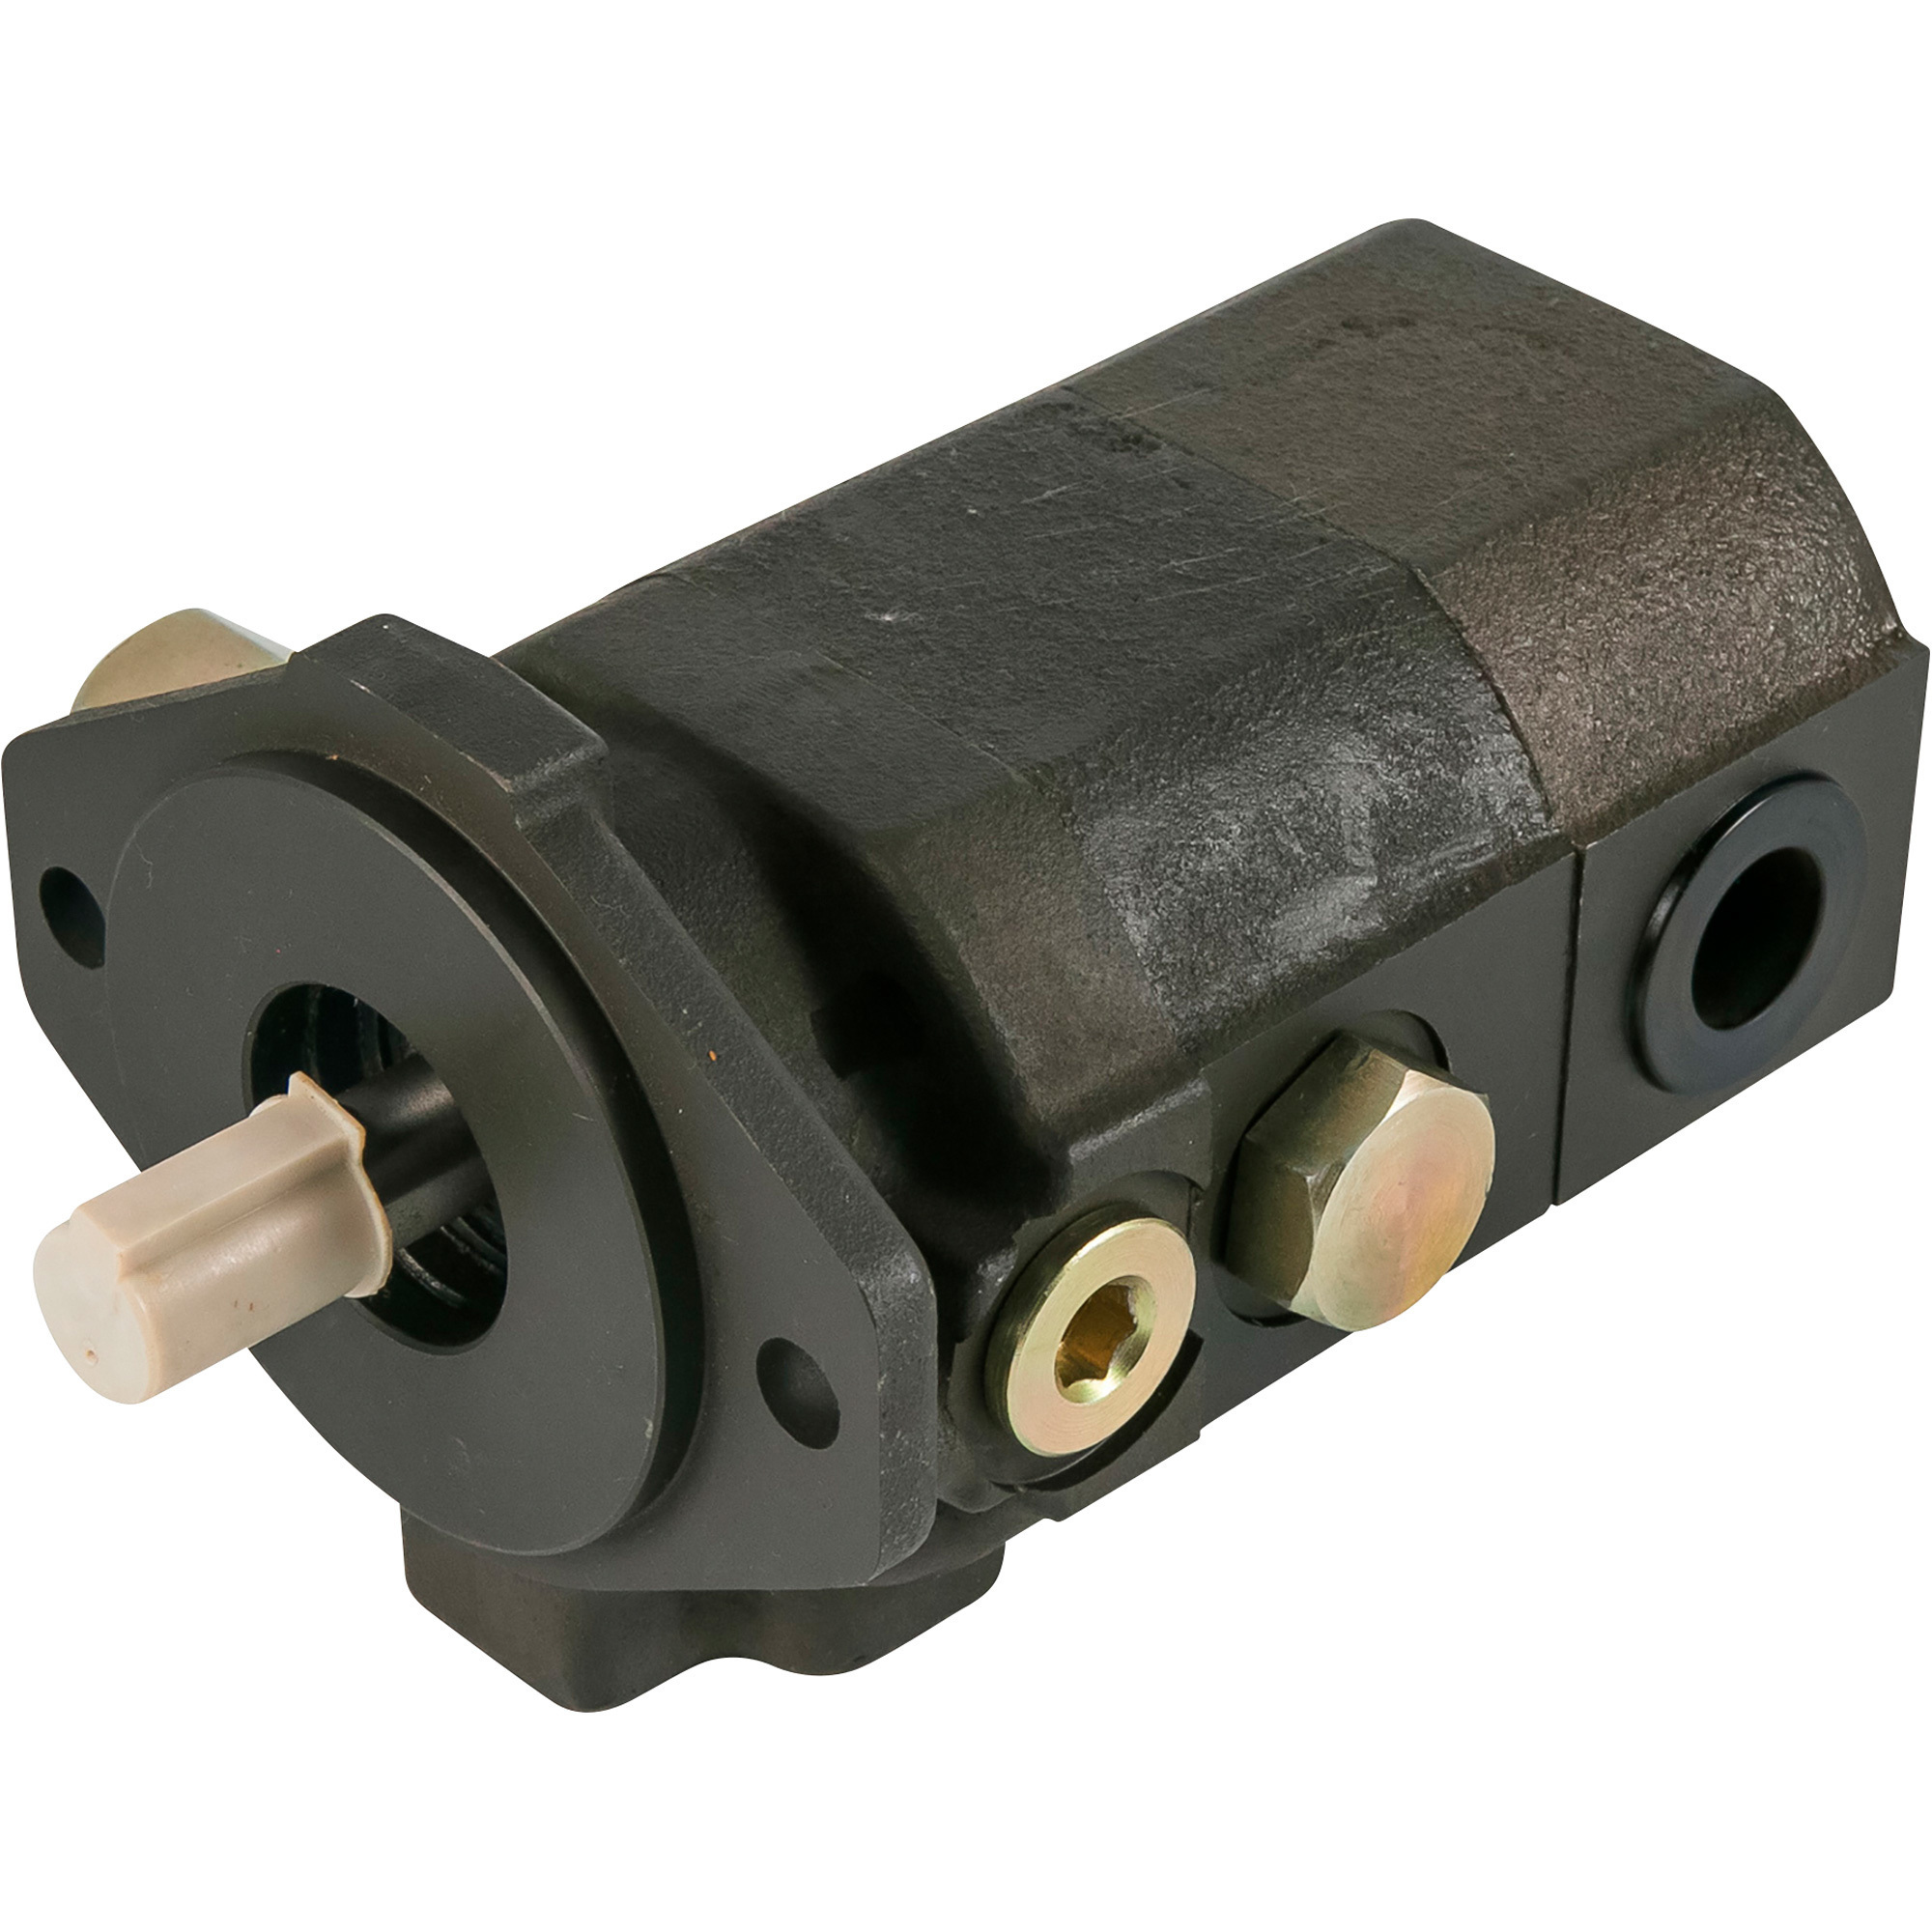 NorTrac Cast Iron Two-Stage High/Low Hydraulic Gear Pump, 22 GPM, 5/8Inch Diameter Shaft, Model CBT-15.2/7.6